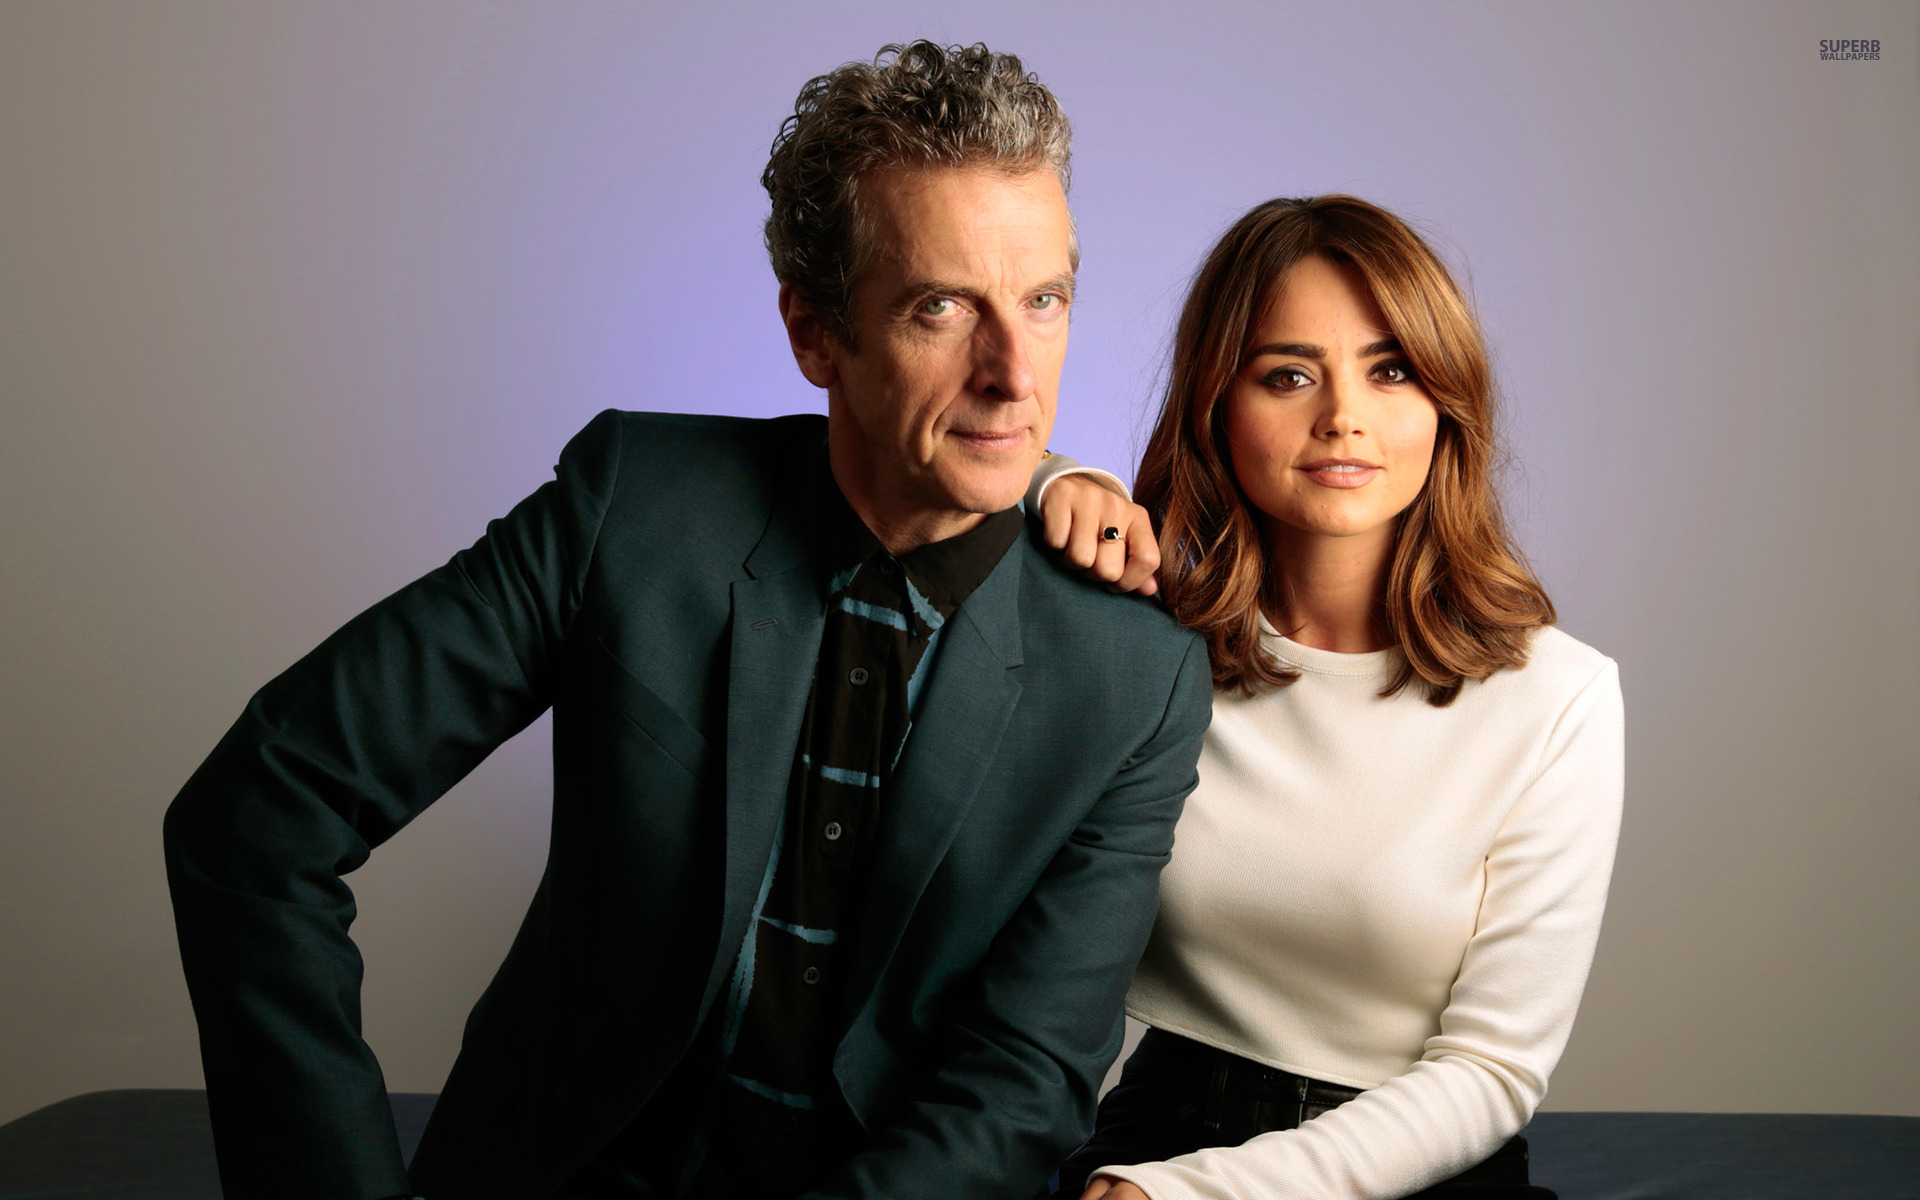 the-doctor-and-clara-doctor-who-32248-1920x1200.jpg